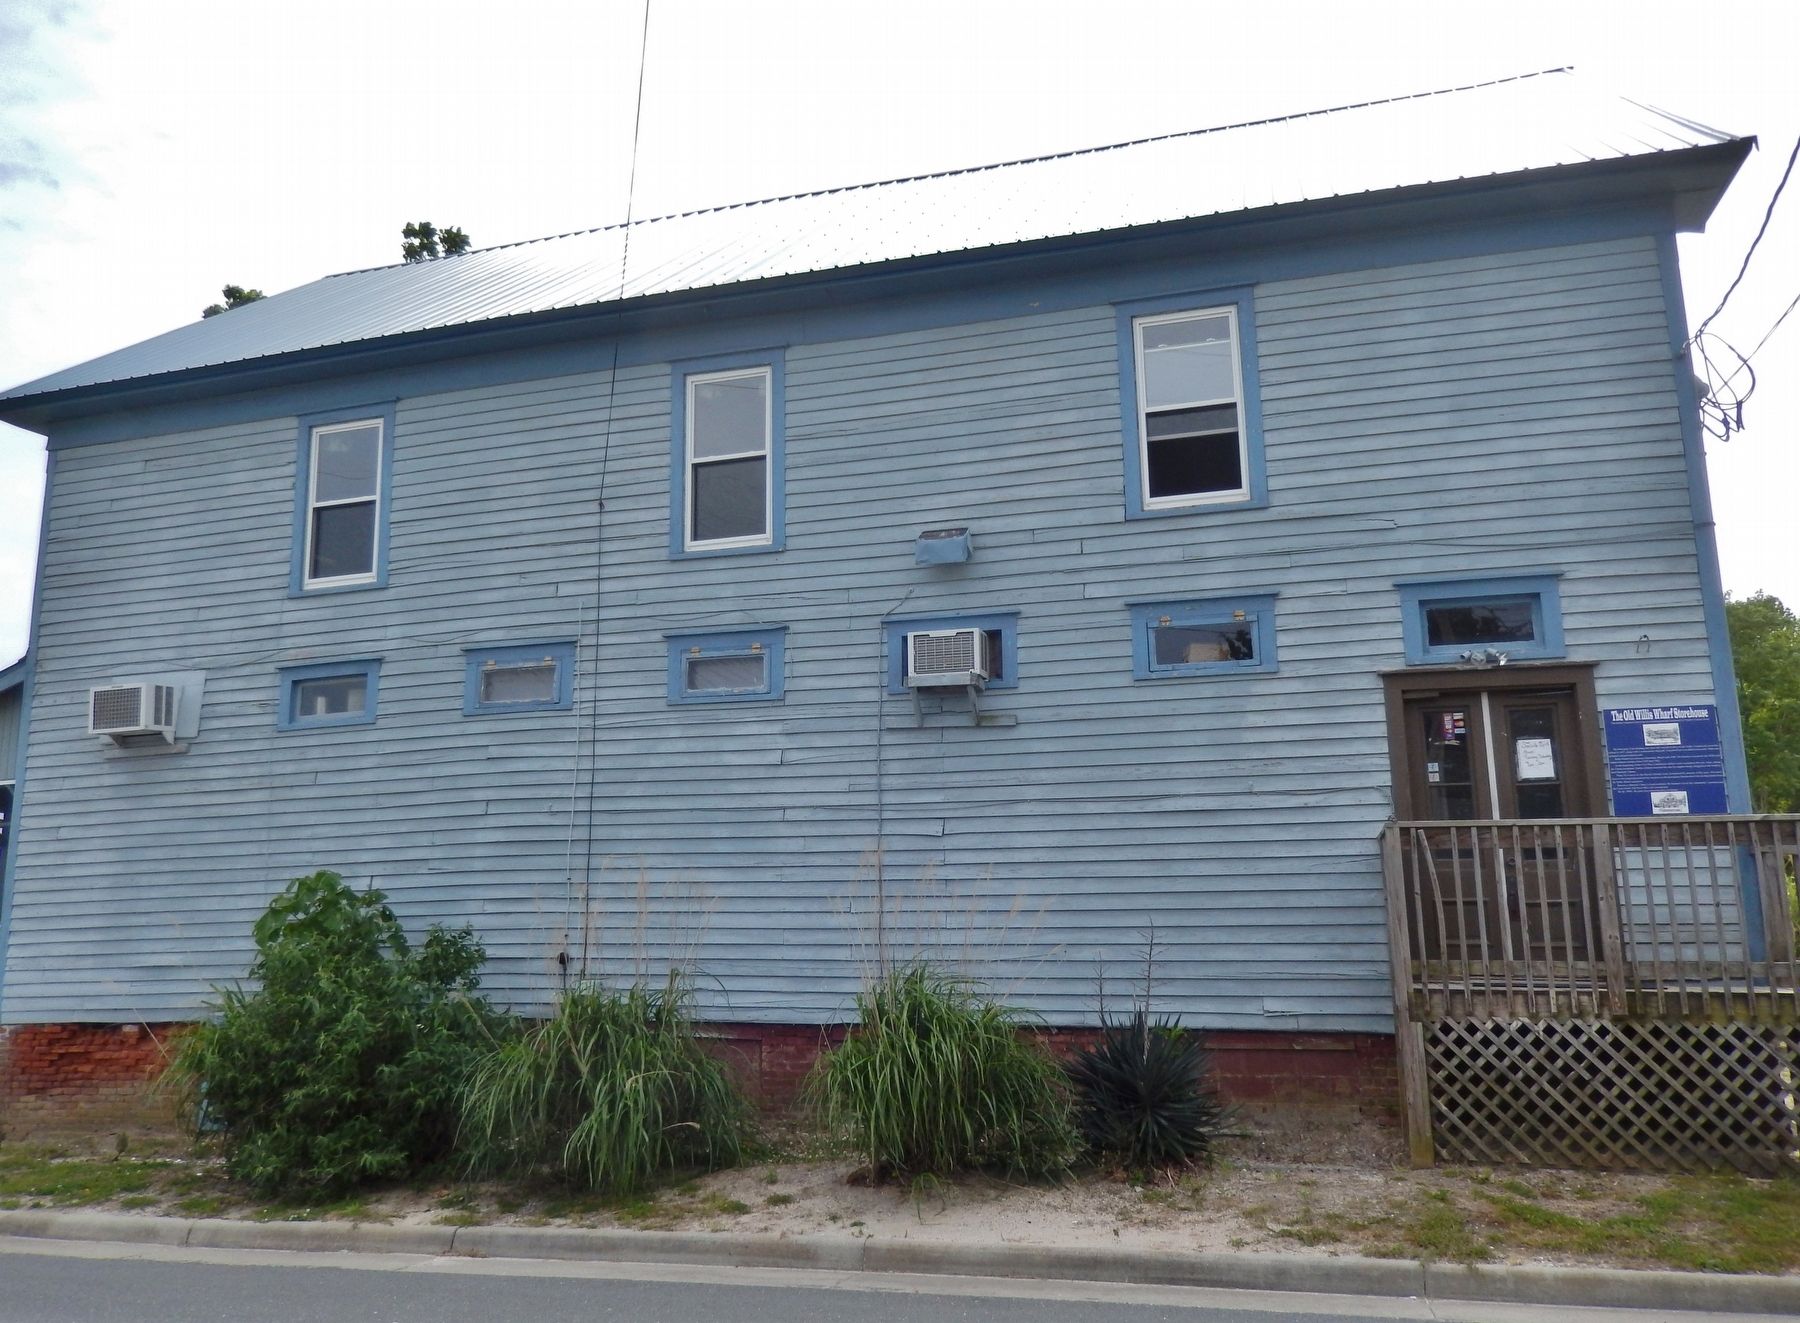 The Old Willis Wharf Storehouse (<i>side view; marker visible right of door</i>) image. Click for full size.